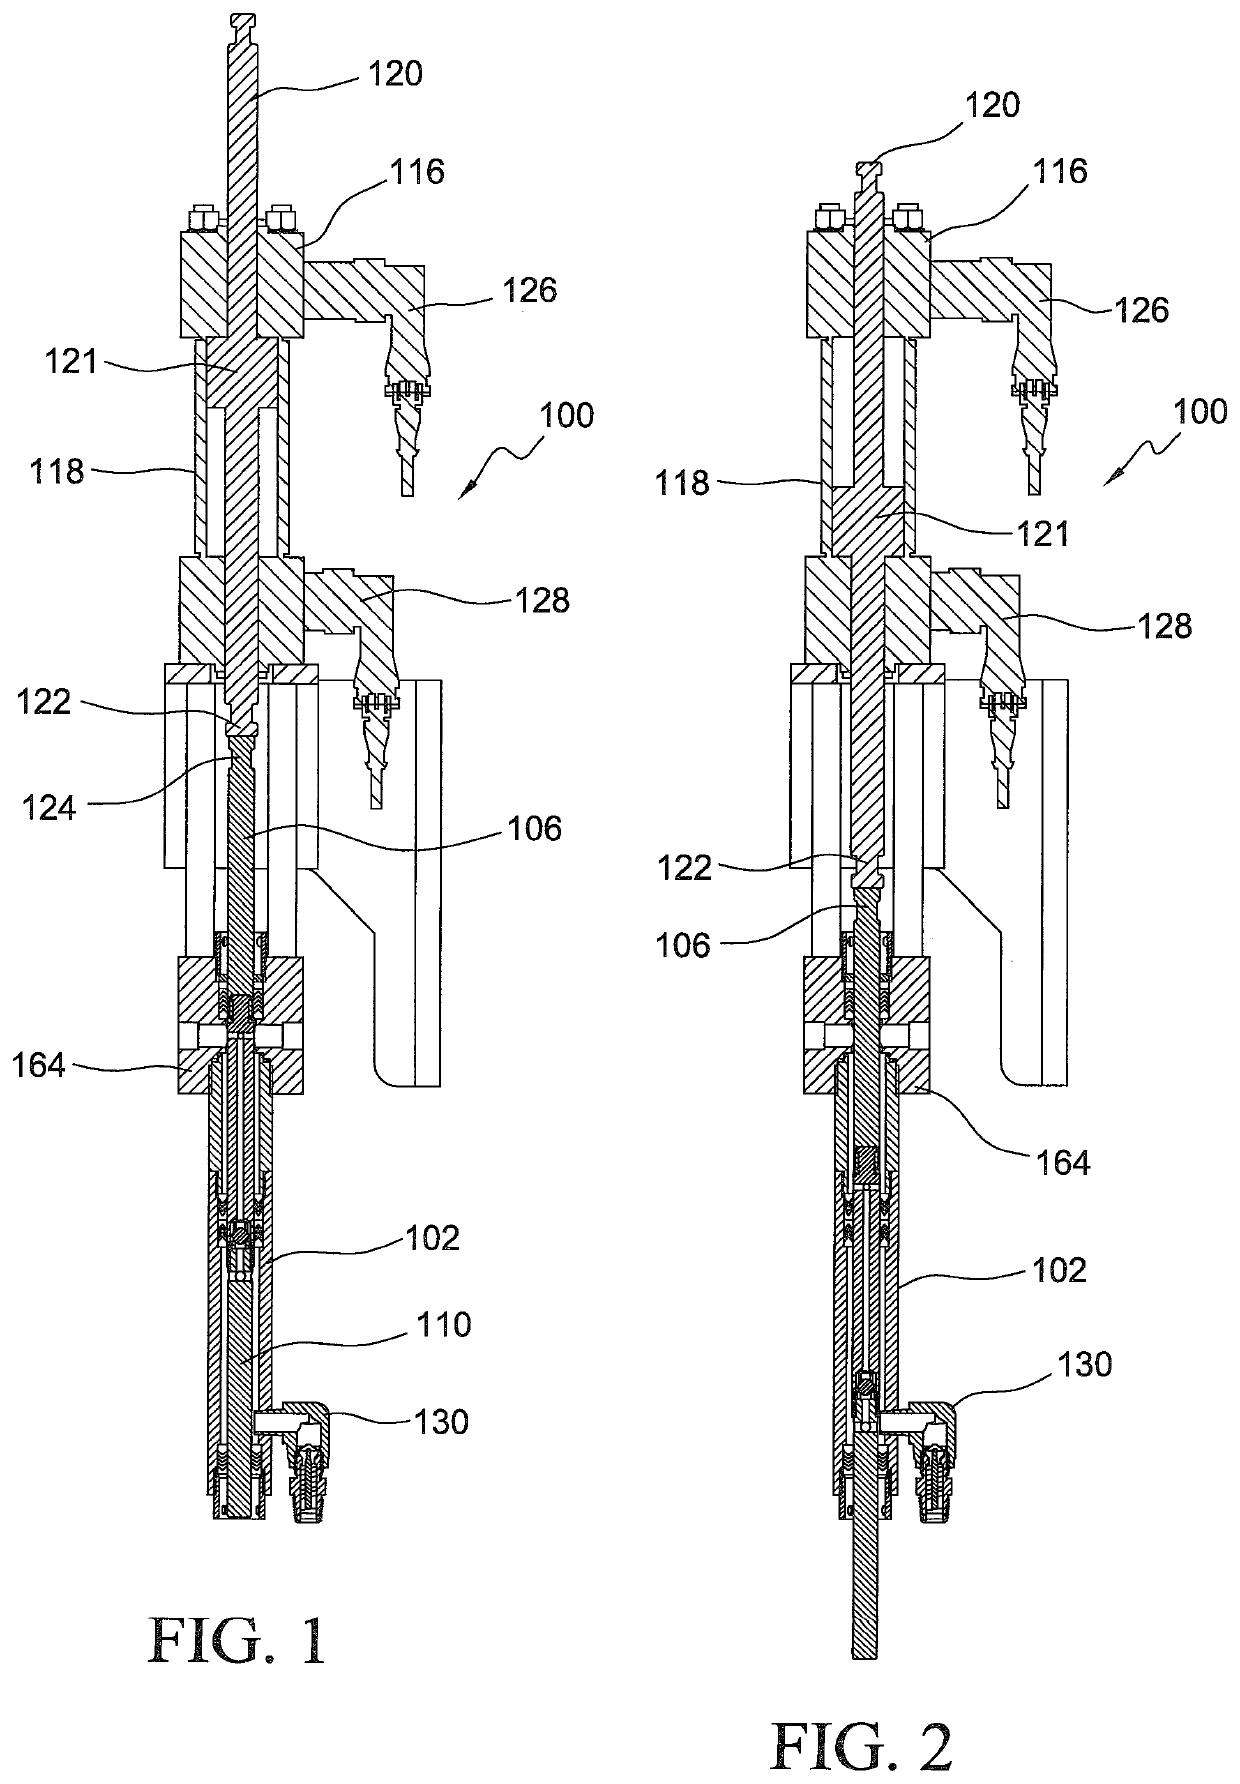 Positive displacement reciprocating pump assembly for dispensing predeterminedly precise amounts of fluid during both the up and down strokes of the pump piston